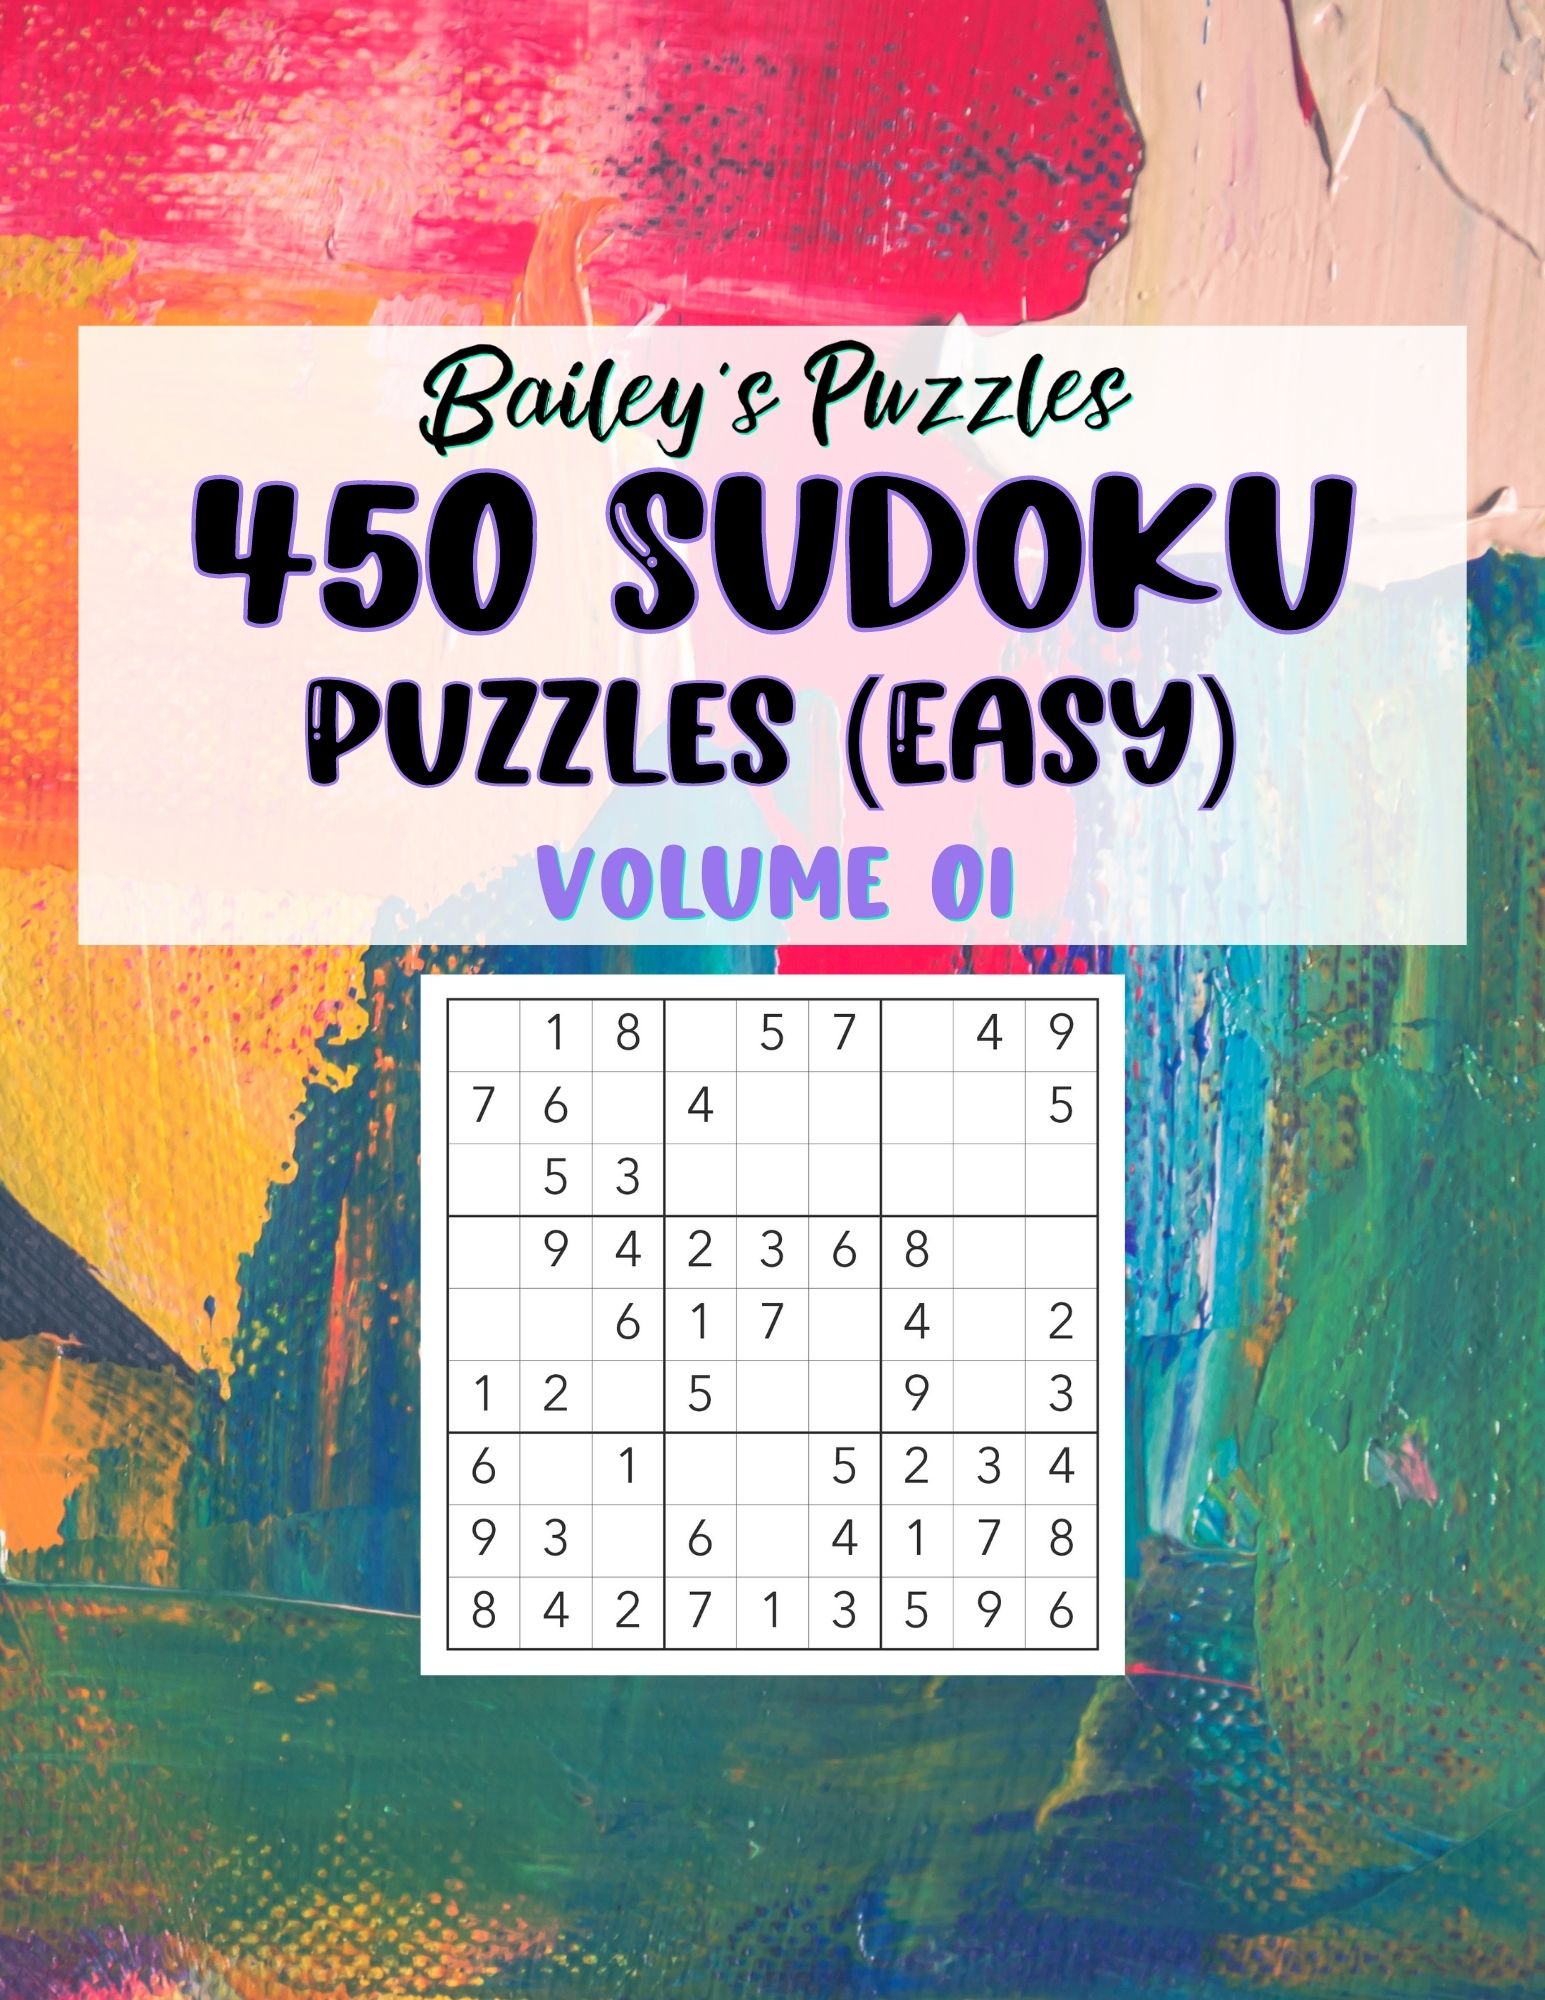 Front Cover - 450 Sudoku Puzzles (easy)